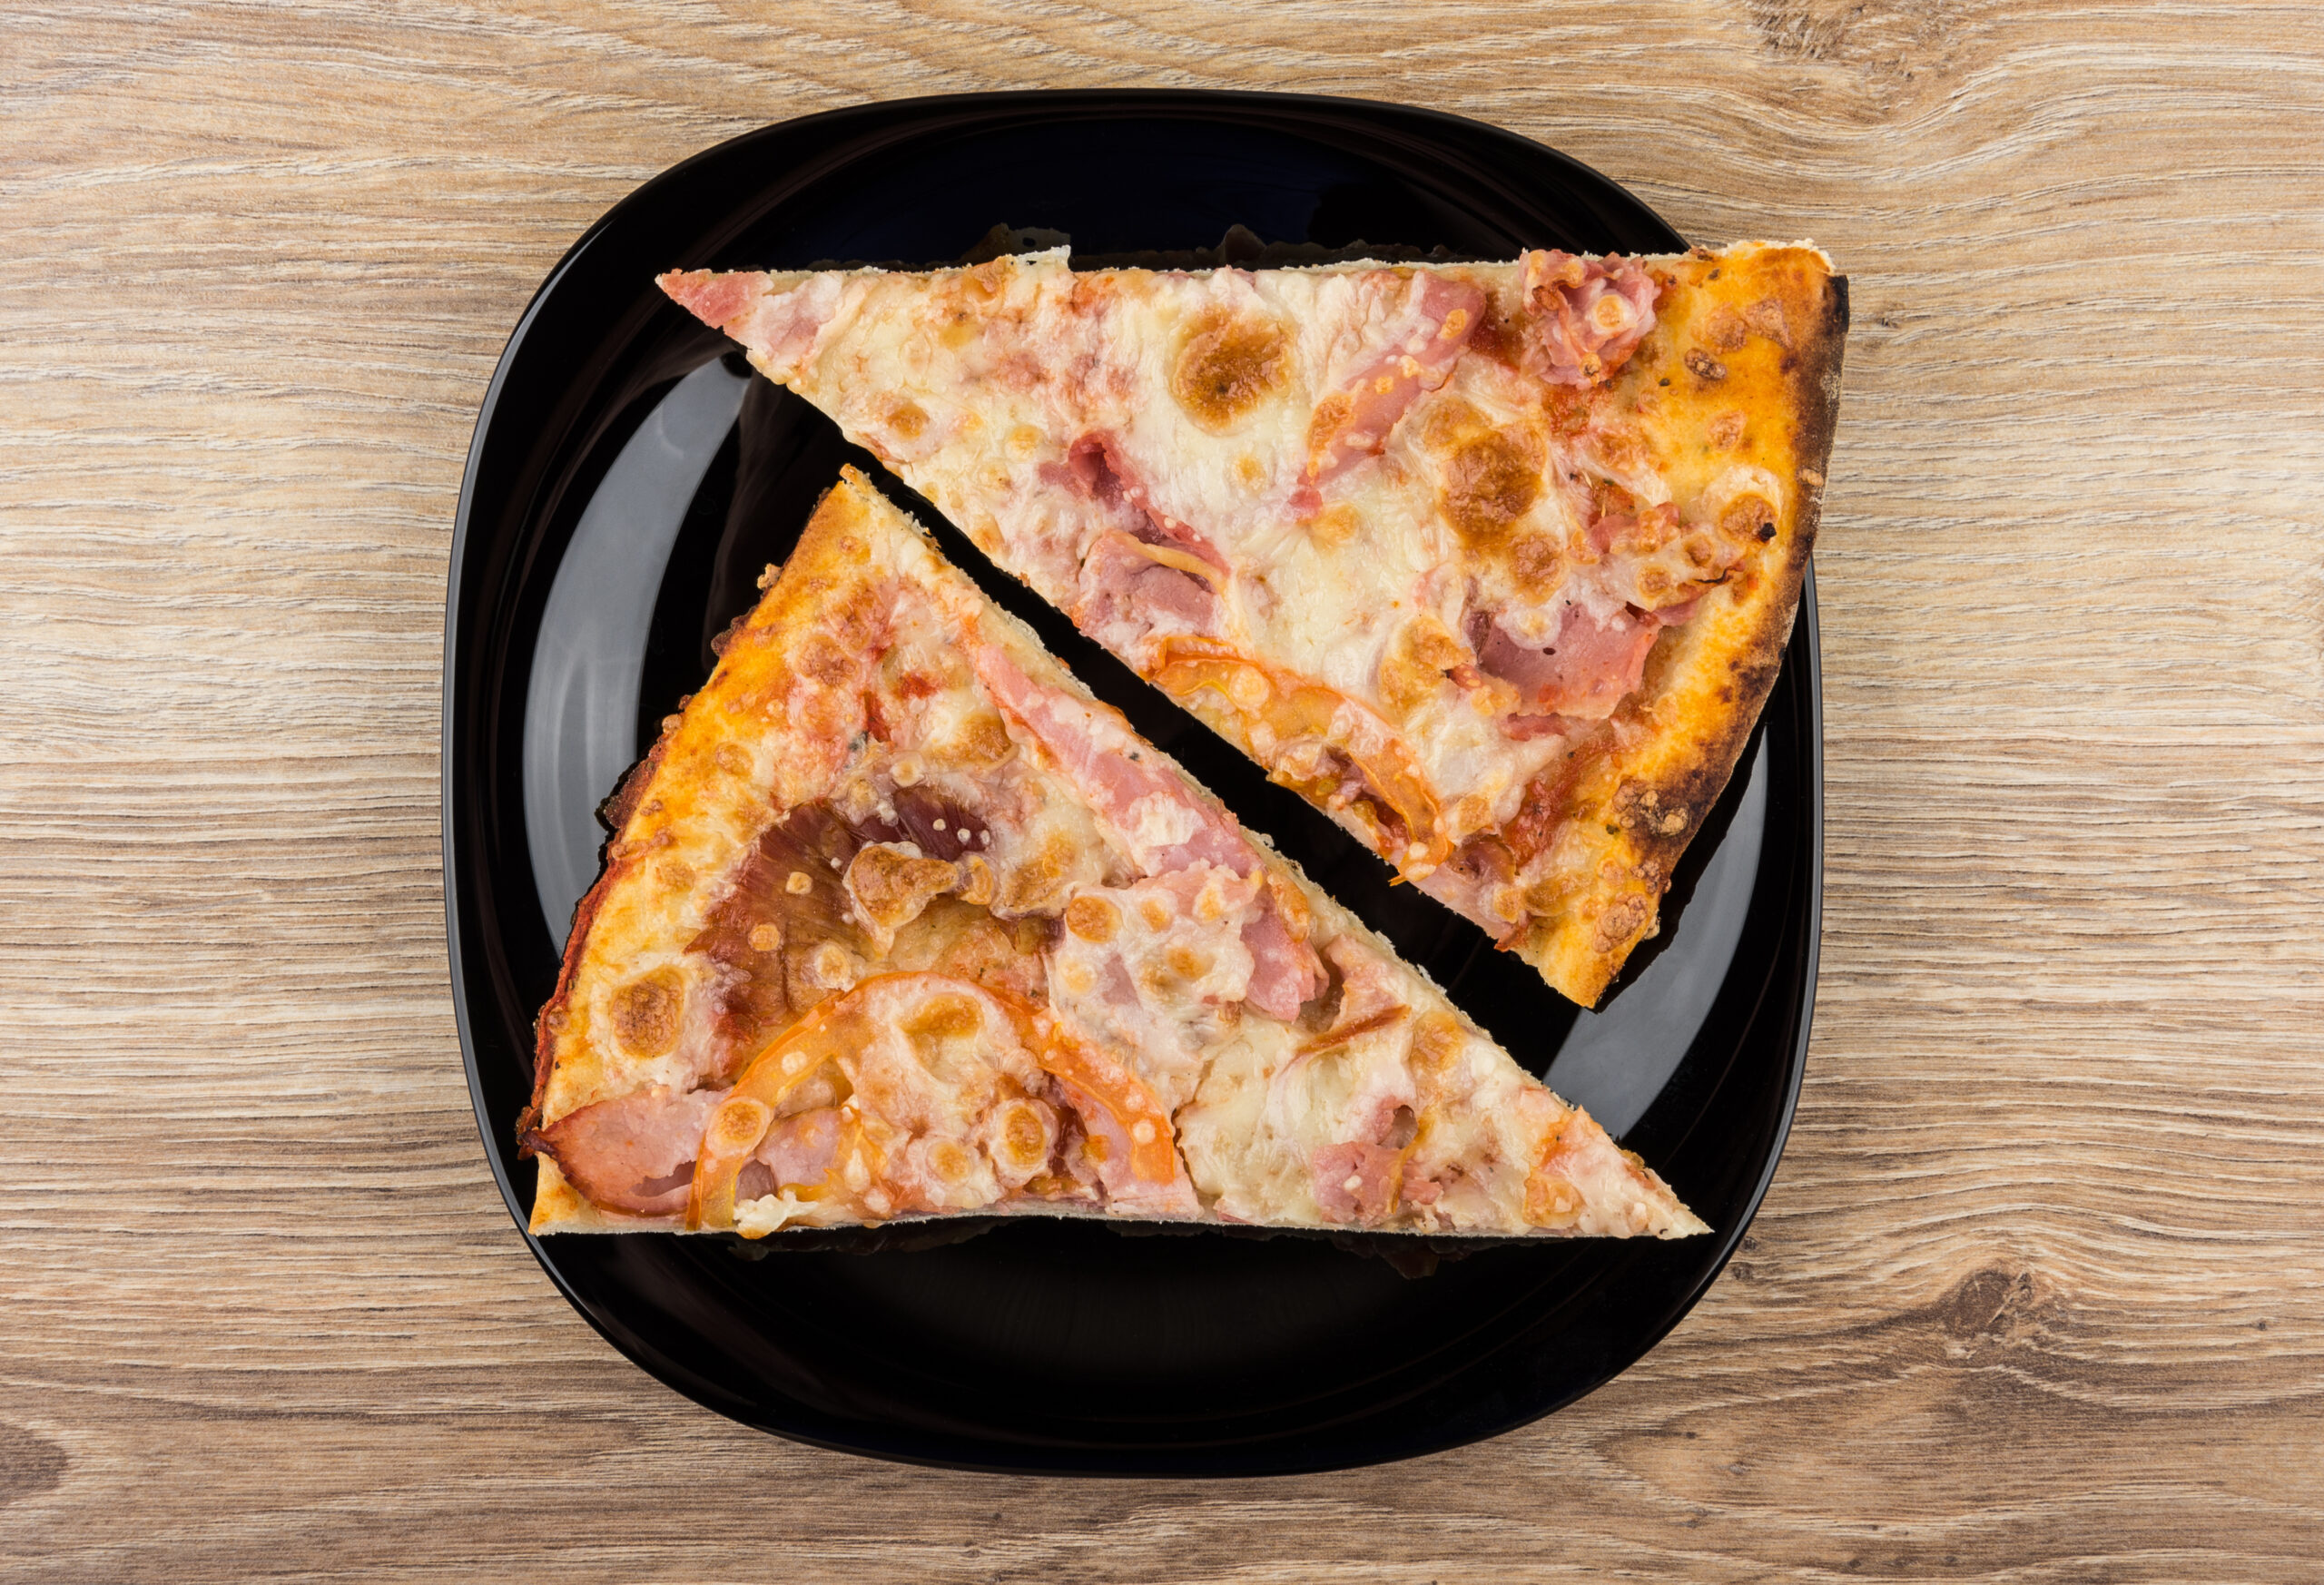 two triangle slices of pizza composed into rectangle